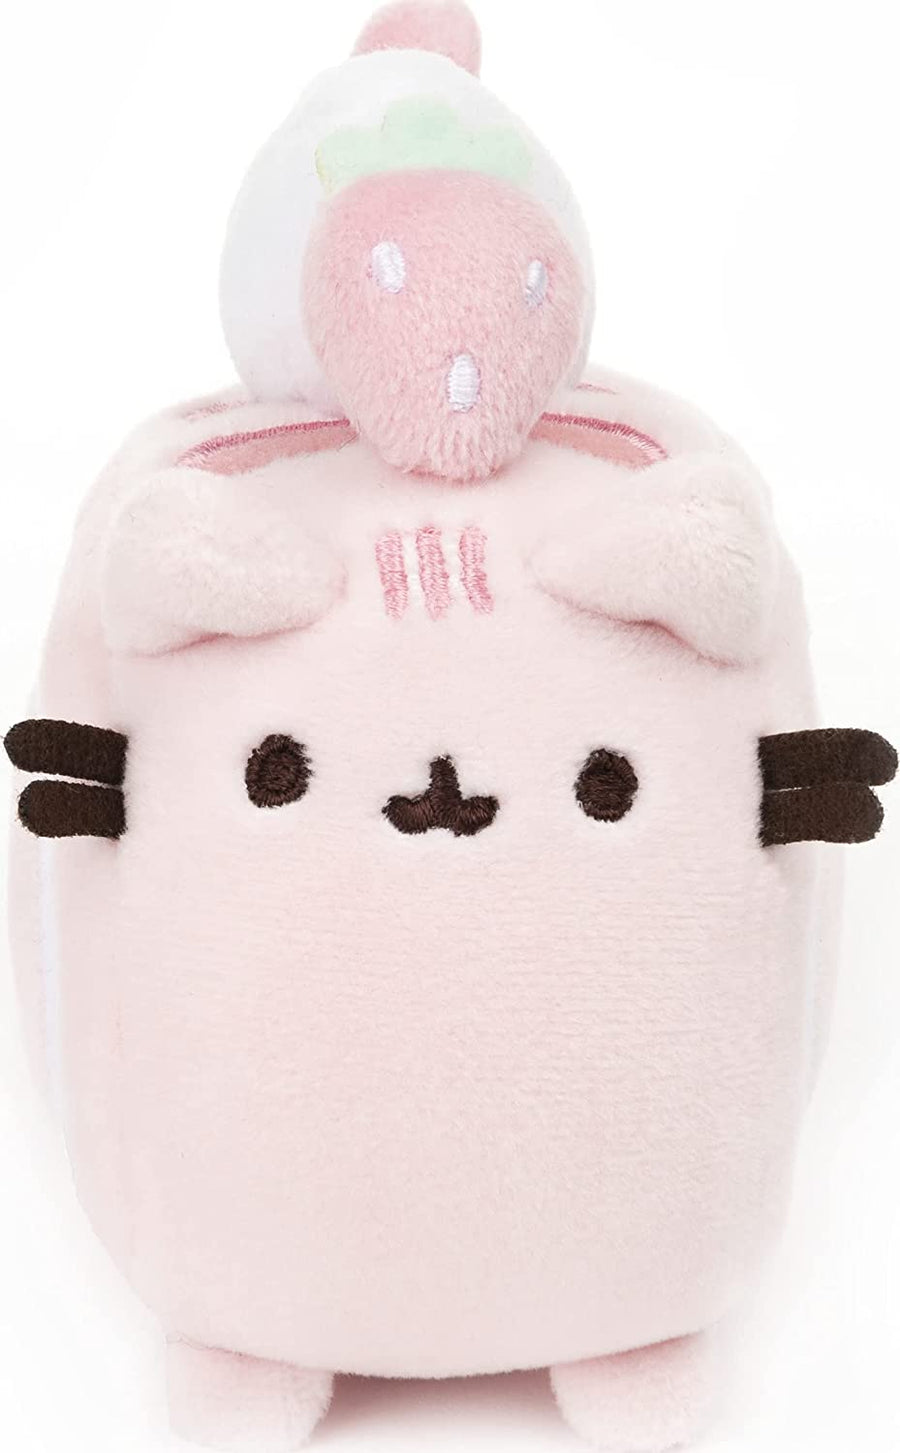 Roll Cake Pusheen Sweet Dessert Squishy Plush Stuffed Animal Cat Squishy and Satisfyingly Stretchy Fabric, for Ages 8 and Up, Pink and Purple, 4 www.cutecrushco.com